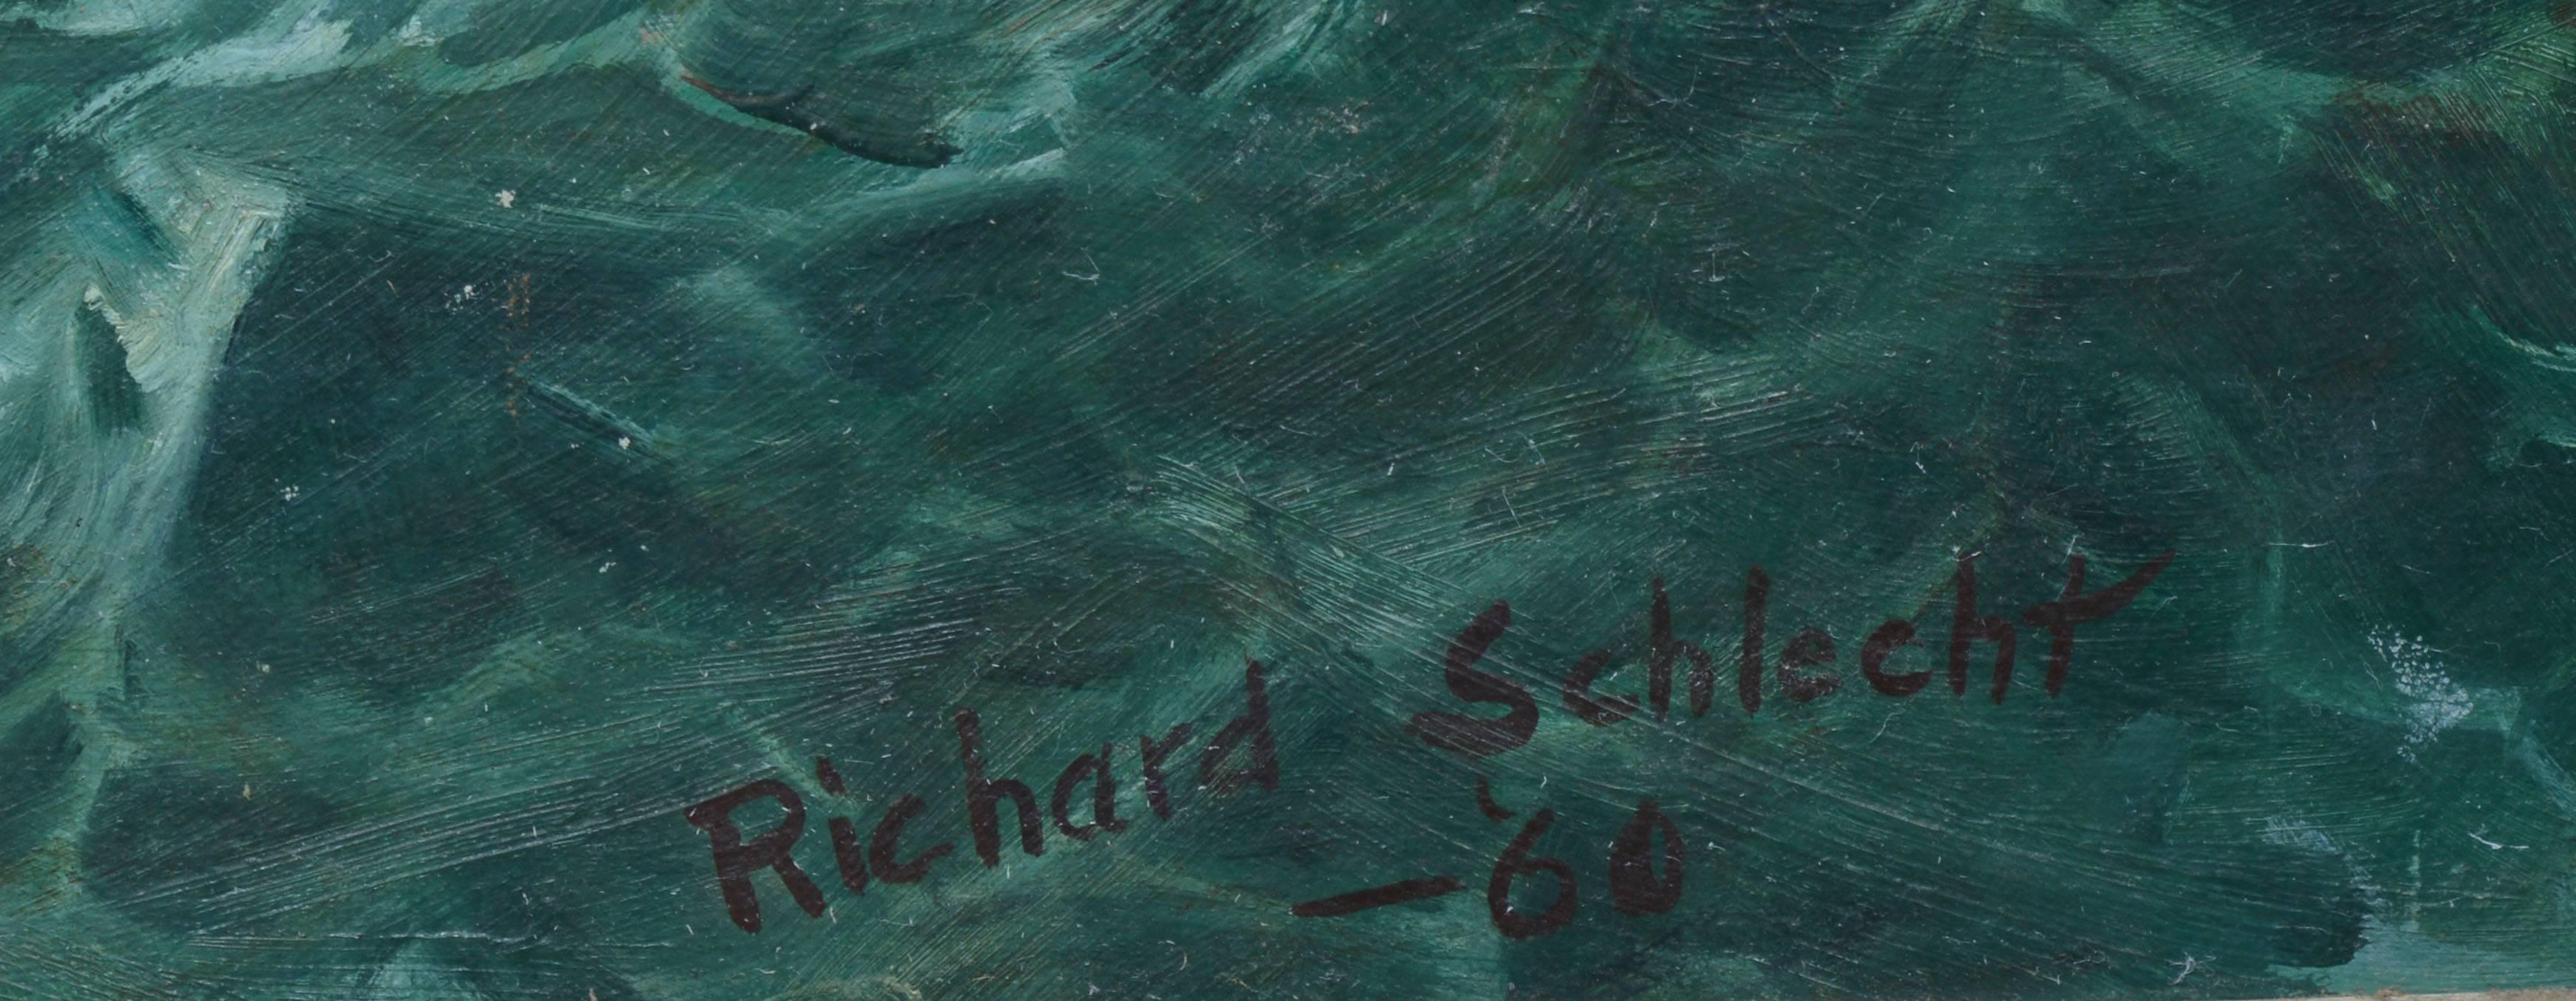 Impressionist oil painting of a wild sea by Richard Schlecht.  Oil on board, circa 1960.  Signed lower right, "Richard Schlecht".  Displayed in a gold frame.  Image size, 28"L x 20.5"H, overall 34"L x 27"H.  